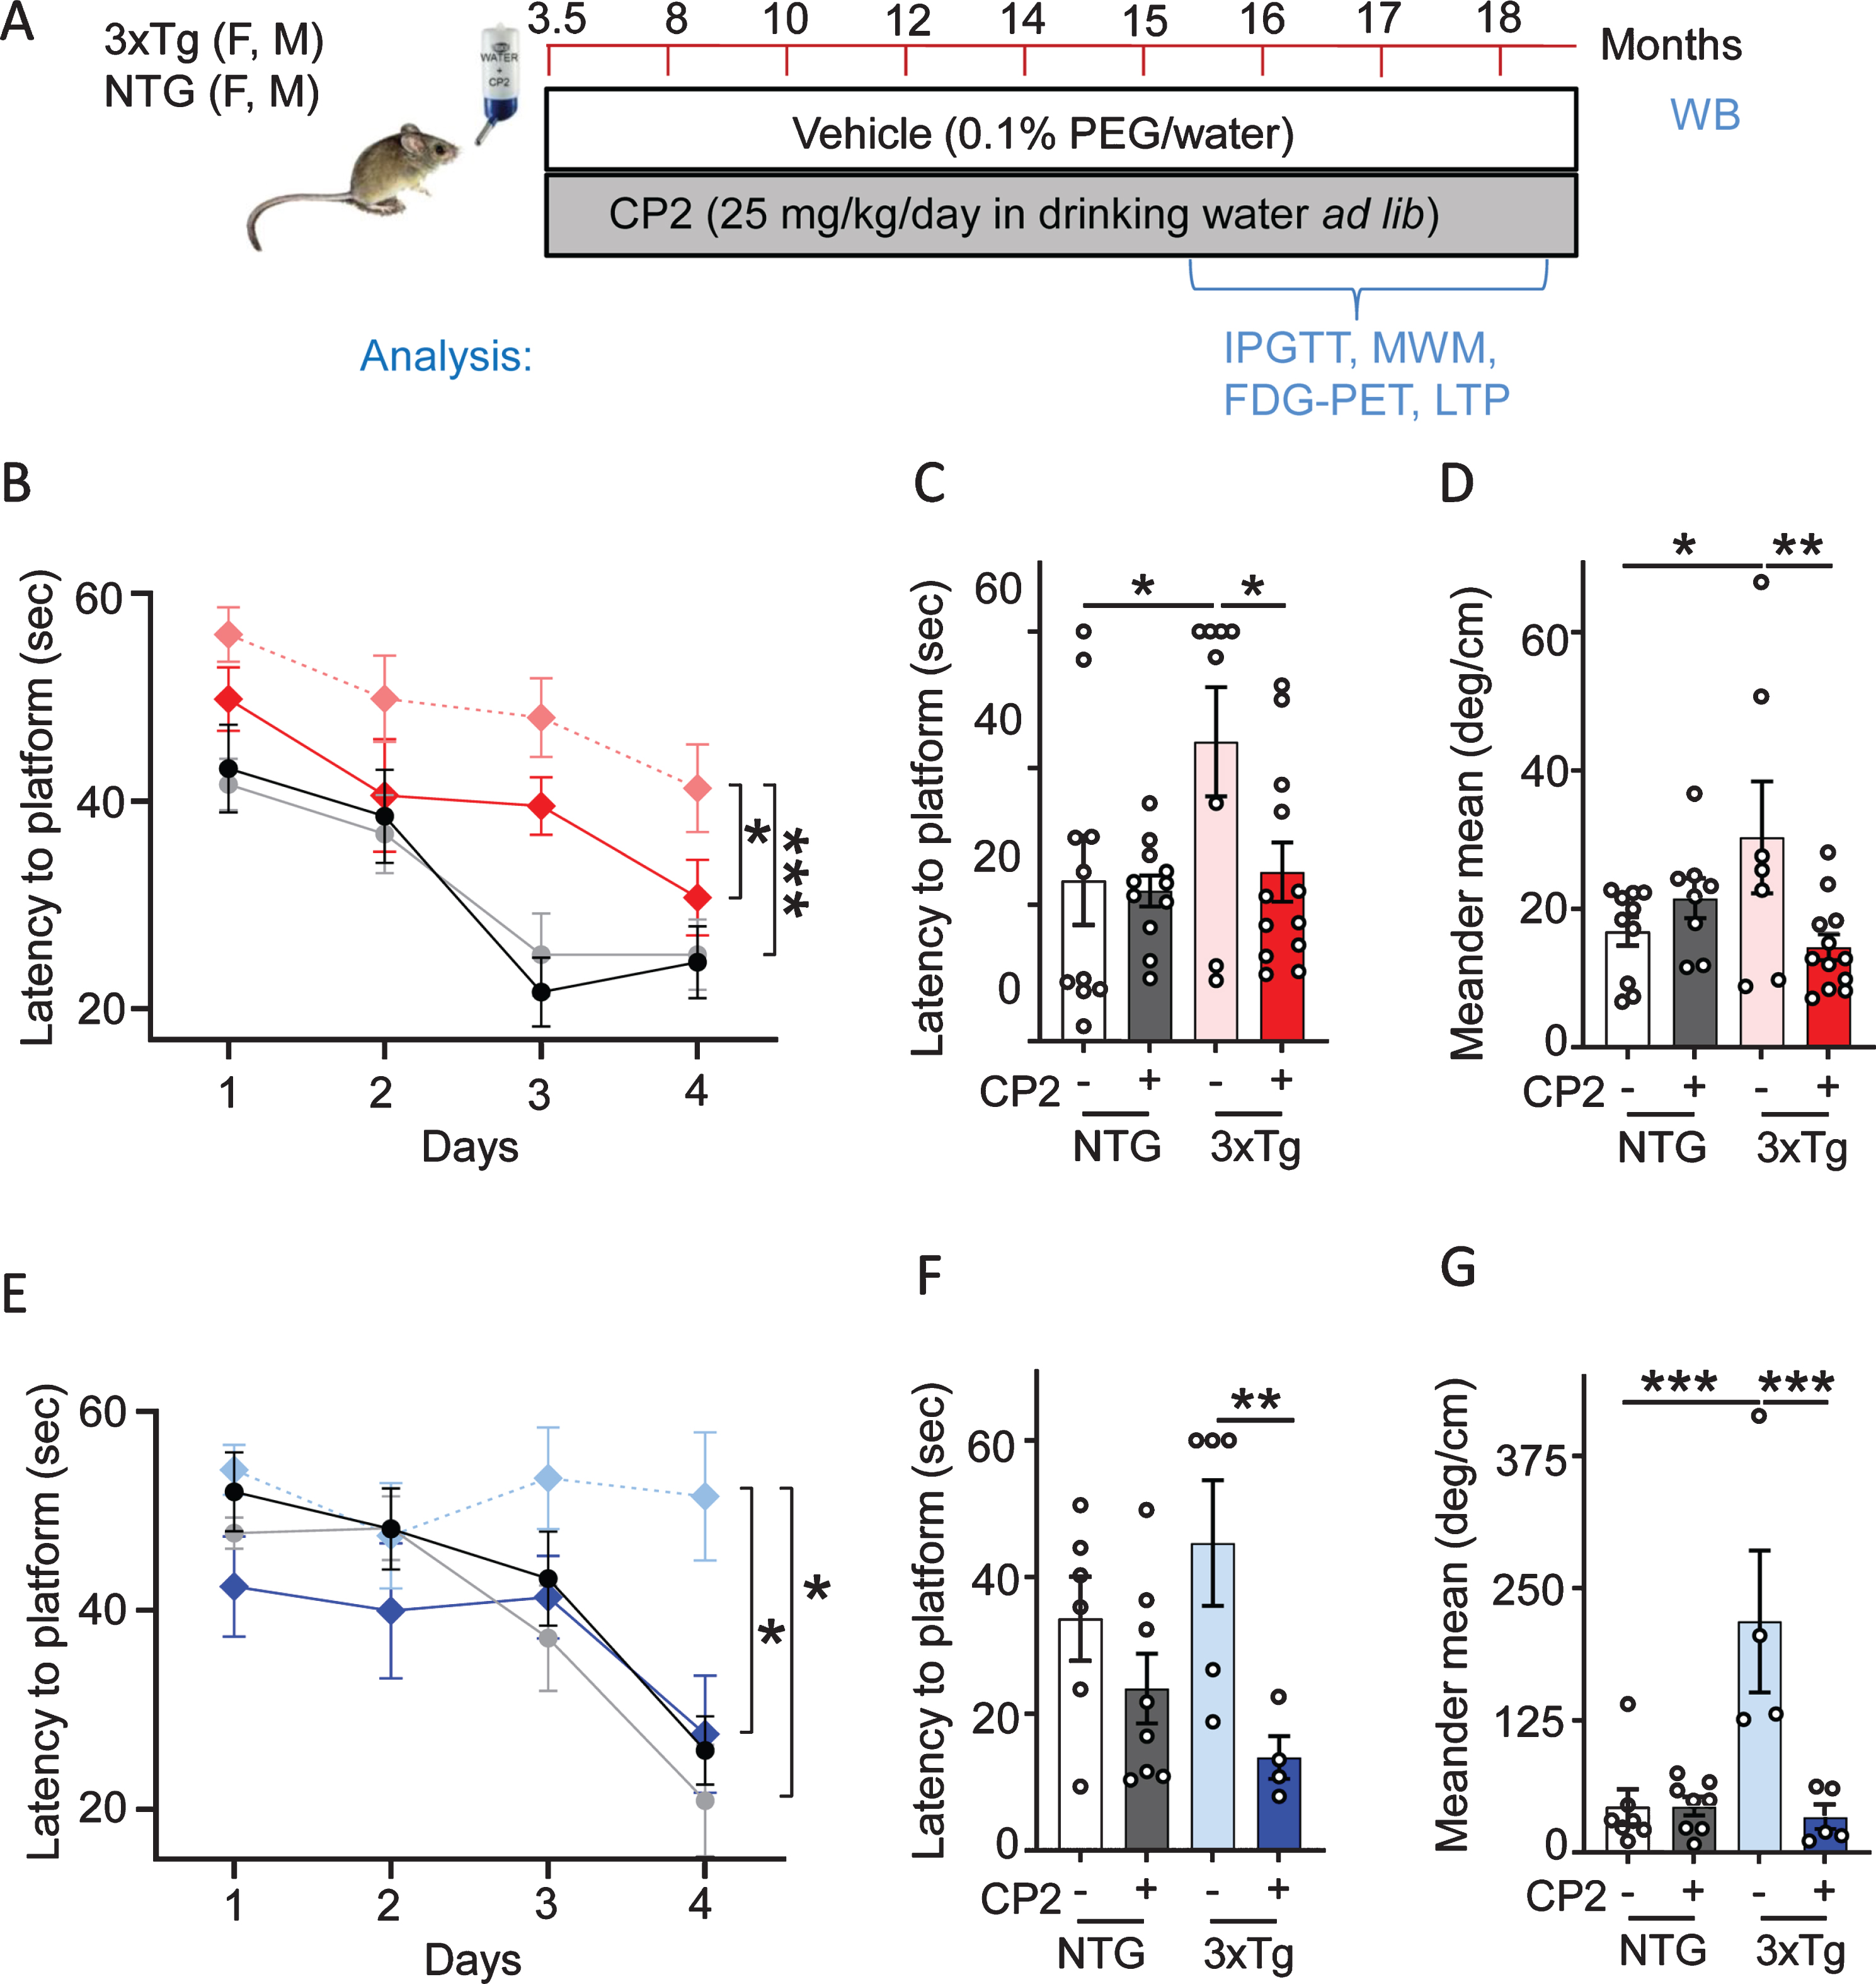 Long-term CP2 treatment ameliorates cognitive deficit in male and female 3xTg-AD mice. A) The timeline of CP2 treatment in 3xTg-AD and NTG male and female mice (n = 15 per each group). B) Memory acquisition was done based on the time of escape latency established over 4 days of training in the MWM test. C) Latency to reach the platform 24 h after the last training session showed that CP2 treatment significantly improved memory retention in female 3xTg-AD mice. D) CP2 treatment significantly reduced meandering (the direction changes) in female 3xTg-AD mice. E) CP2 improved memory acquisition in 3xTg-AD male mice, whereas vehicle-treated 3xTg-AD mice had impaired learning acquisition compared to NTG mice. F) Latency to reach the platform 24 h after the last training session showed that CP2 treatment significantly improved memory retention in male 3xTg-AD mice. G) CP2 treatment significantly reduced meandering (the direction changes) in male 3xTg-AD mice. Differences between individual groups were analyzed by two-way ANOVA with Fisher’s post-hoc test. Data are presented as mean±SEM. *p < 0.05, **p < 0.01, ***p < 0.001. Dotted light blue and light red: vehicle-treated 3xTg-AD male and female mice, respectfully; dark blue and dark red: 3xTg-AD+CP2 male and female mice, respectfully; grey: NTG+CP2 black: vehicle-treated NTG (female mice in C and D; male mice in F and G); n = 10–15 mice per group.